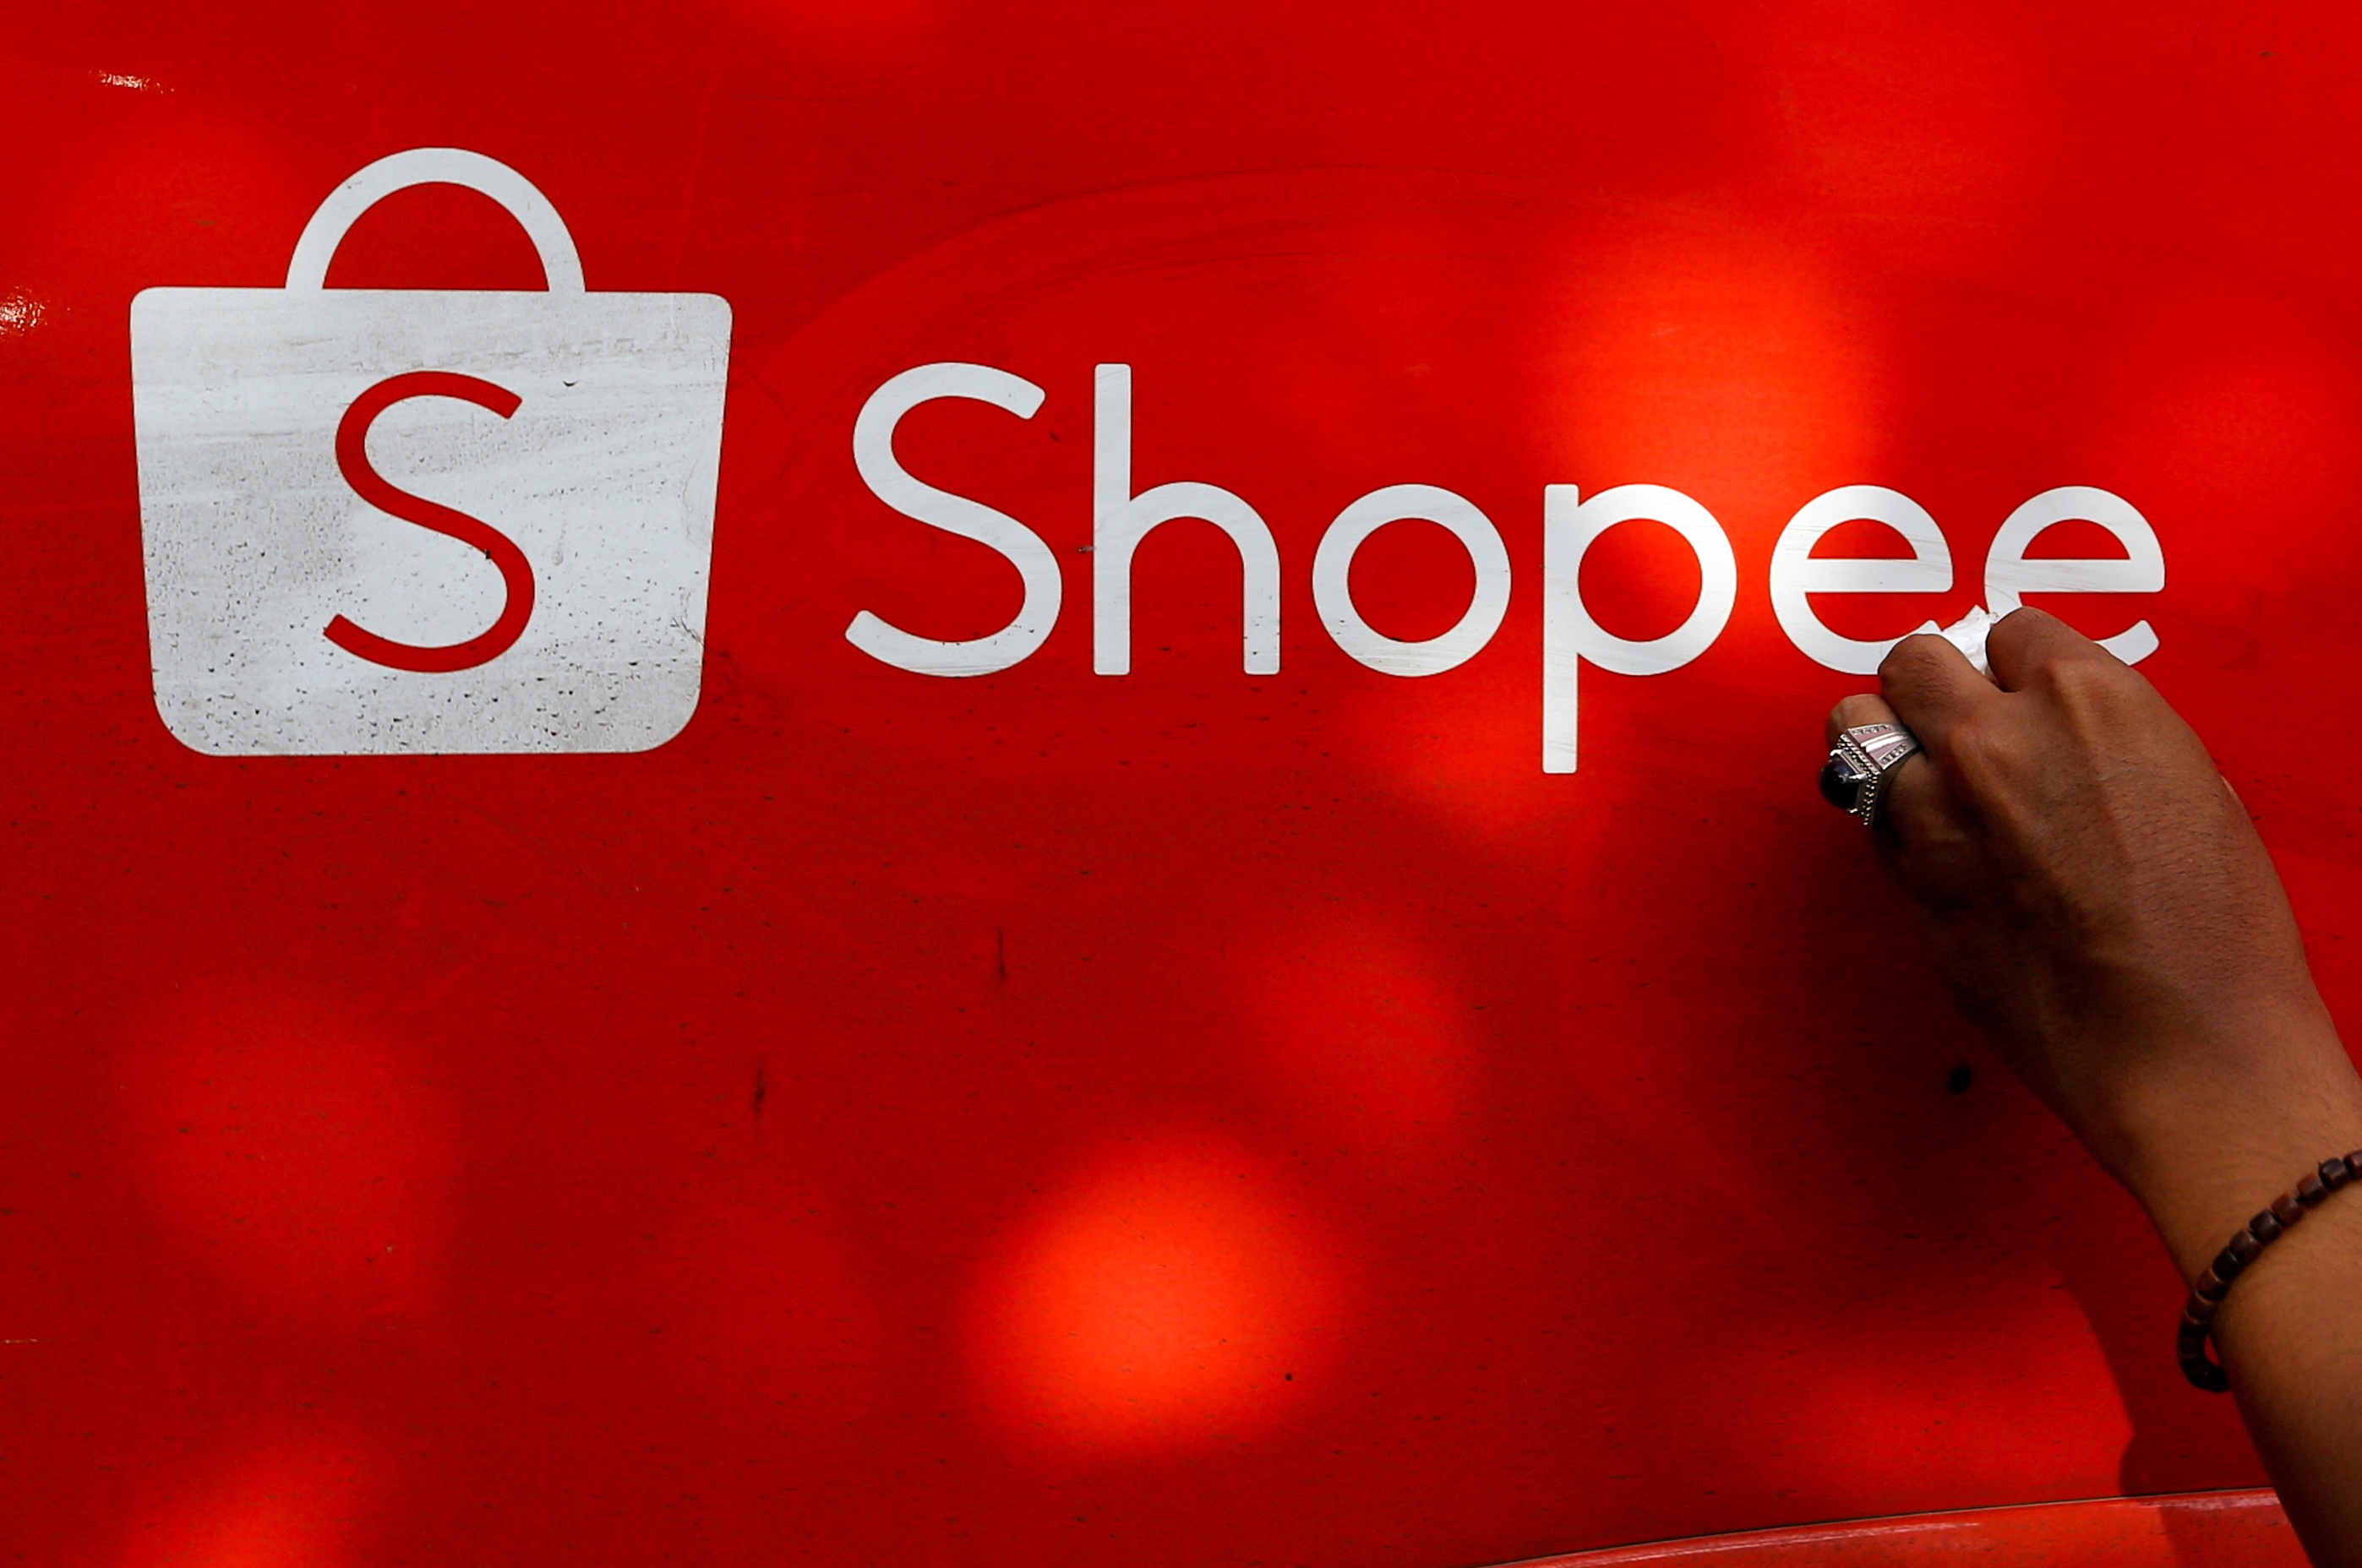 A worker wipes the door of a car with the sign of Shopee, an Indonesian e-commerce platform, in Jakarta